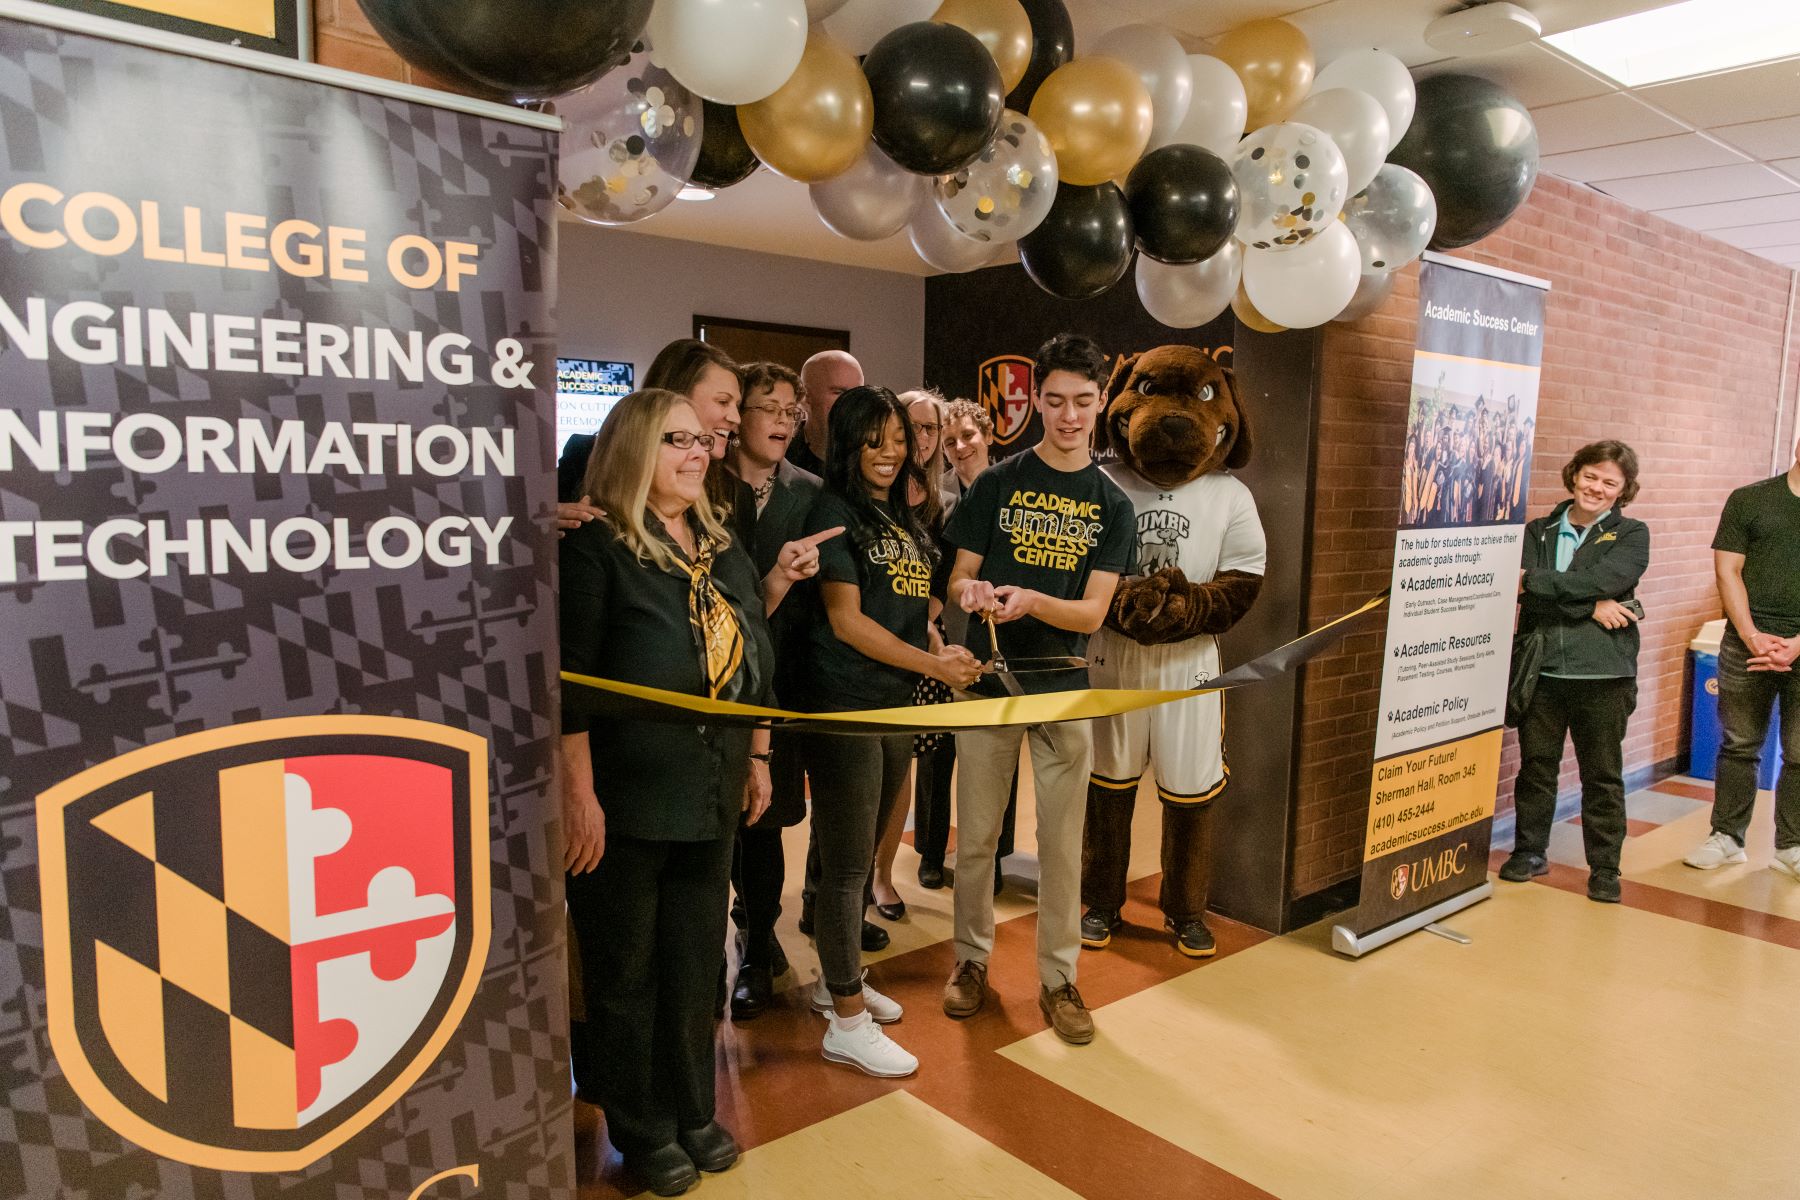 Amid surging demand for computing education, UMBC initiatives boost student success